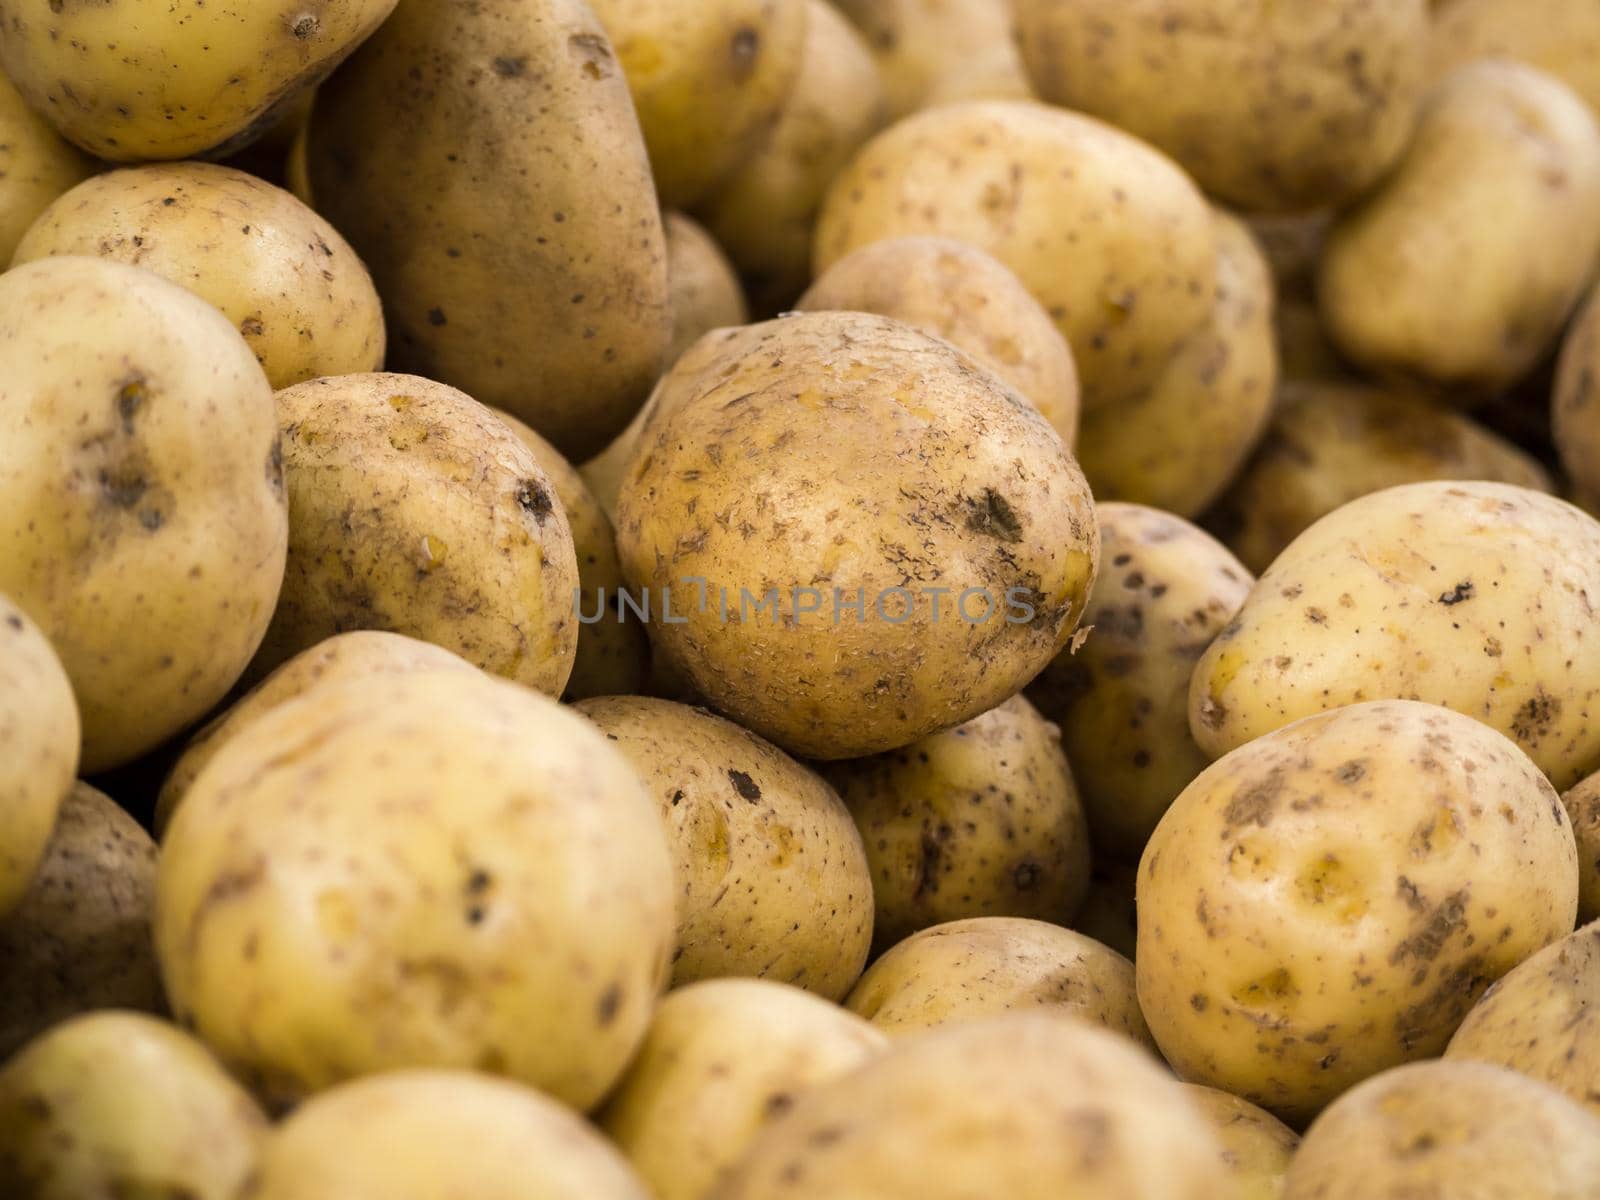 Heap of potatos root. Potatoes for selling at vegetable market. Fresh organic potato stand out among many large background potatos in the market. Soft focus